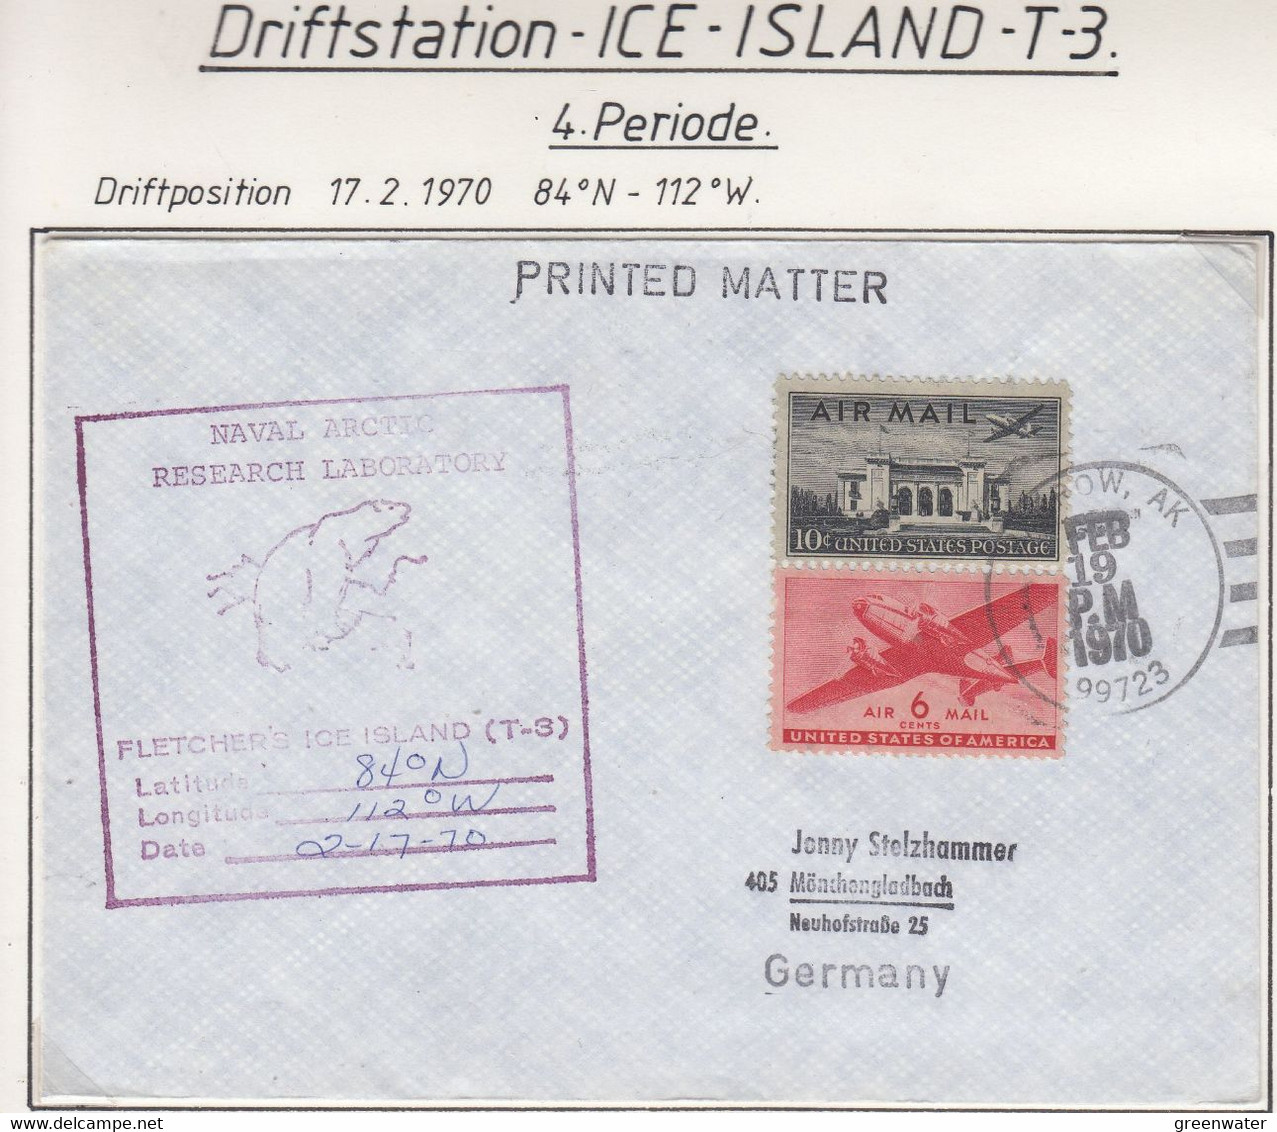 USA Driftstation ICE-ISLAND T-3 Cover Fletcher's Ice Island T-3 Periode 4 Ca FEB 19 1970  (DR134A) - Stations Scientifiques & Stations Dérivantes Arctiques